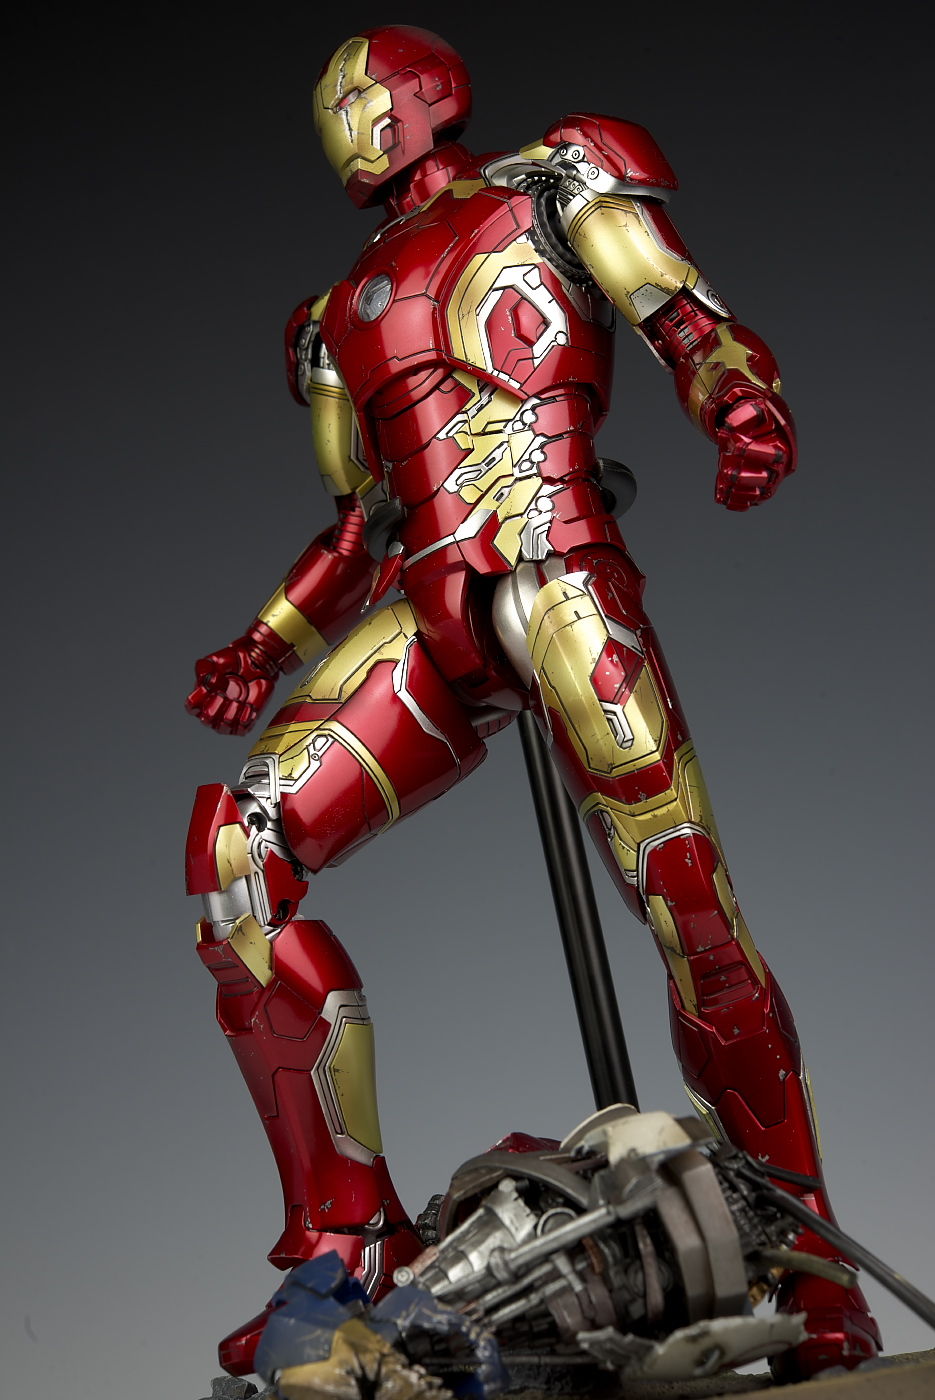 [Avengers: Age Of Ultron] Hot Toys Movie Masterpiece DIECAST Series